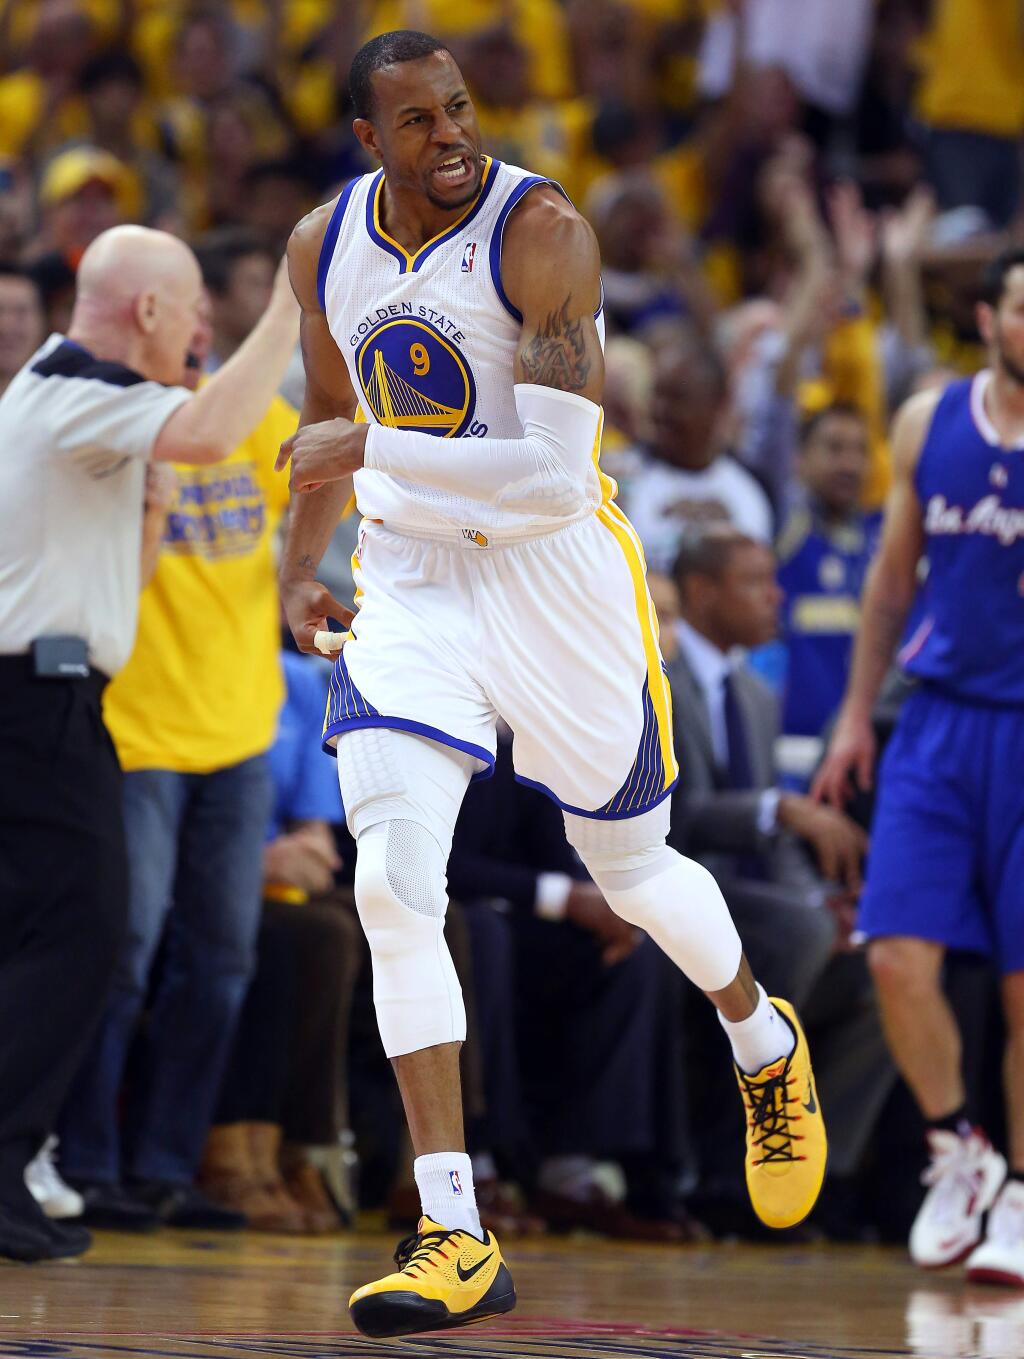 Golden State Warriors forward Andre Iguodala reacts after sinking a jumper against the Los Angeles Clippers during Game 4 in Oakland on Sunday, April 27, 2014. The Warriors defeated the Clippers 118-97 (Christopher Chung/ The Press Democrat)